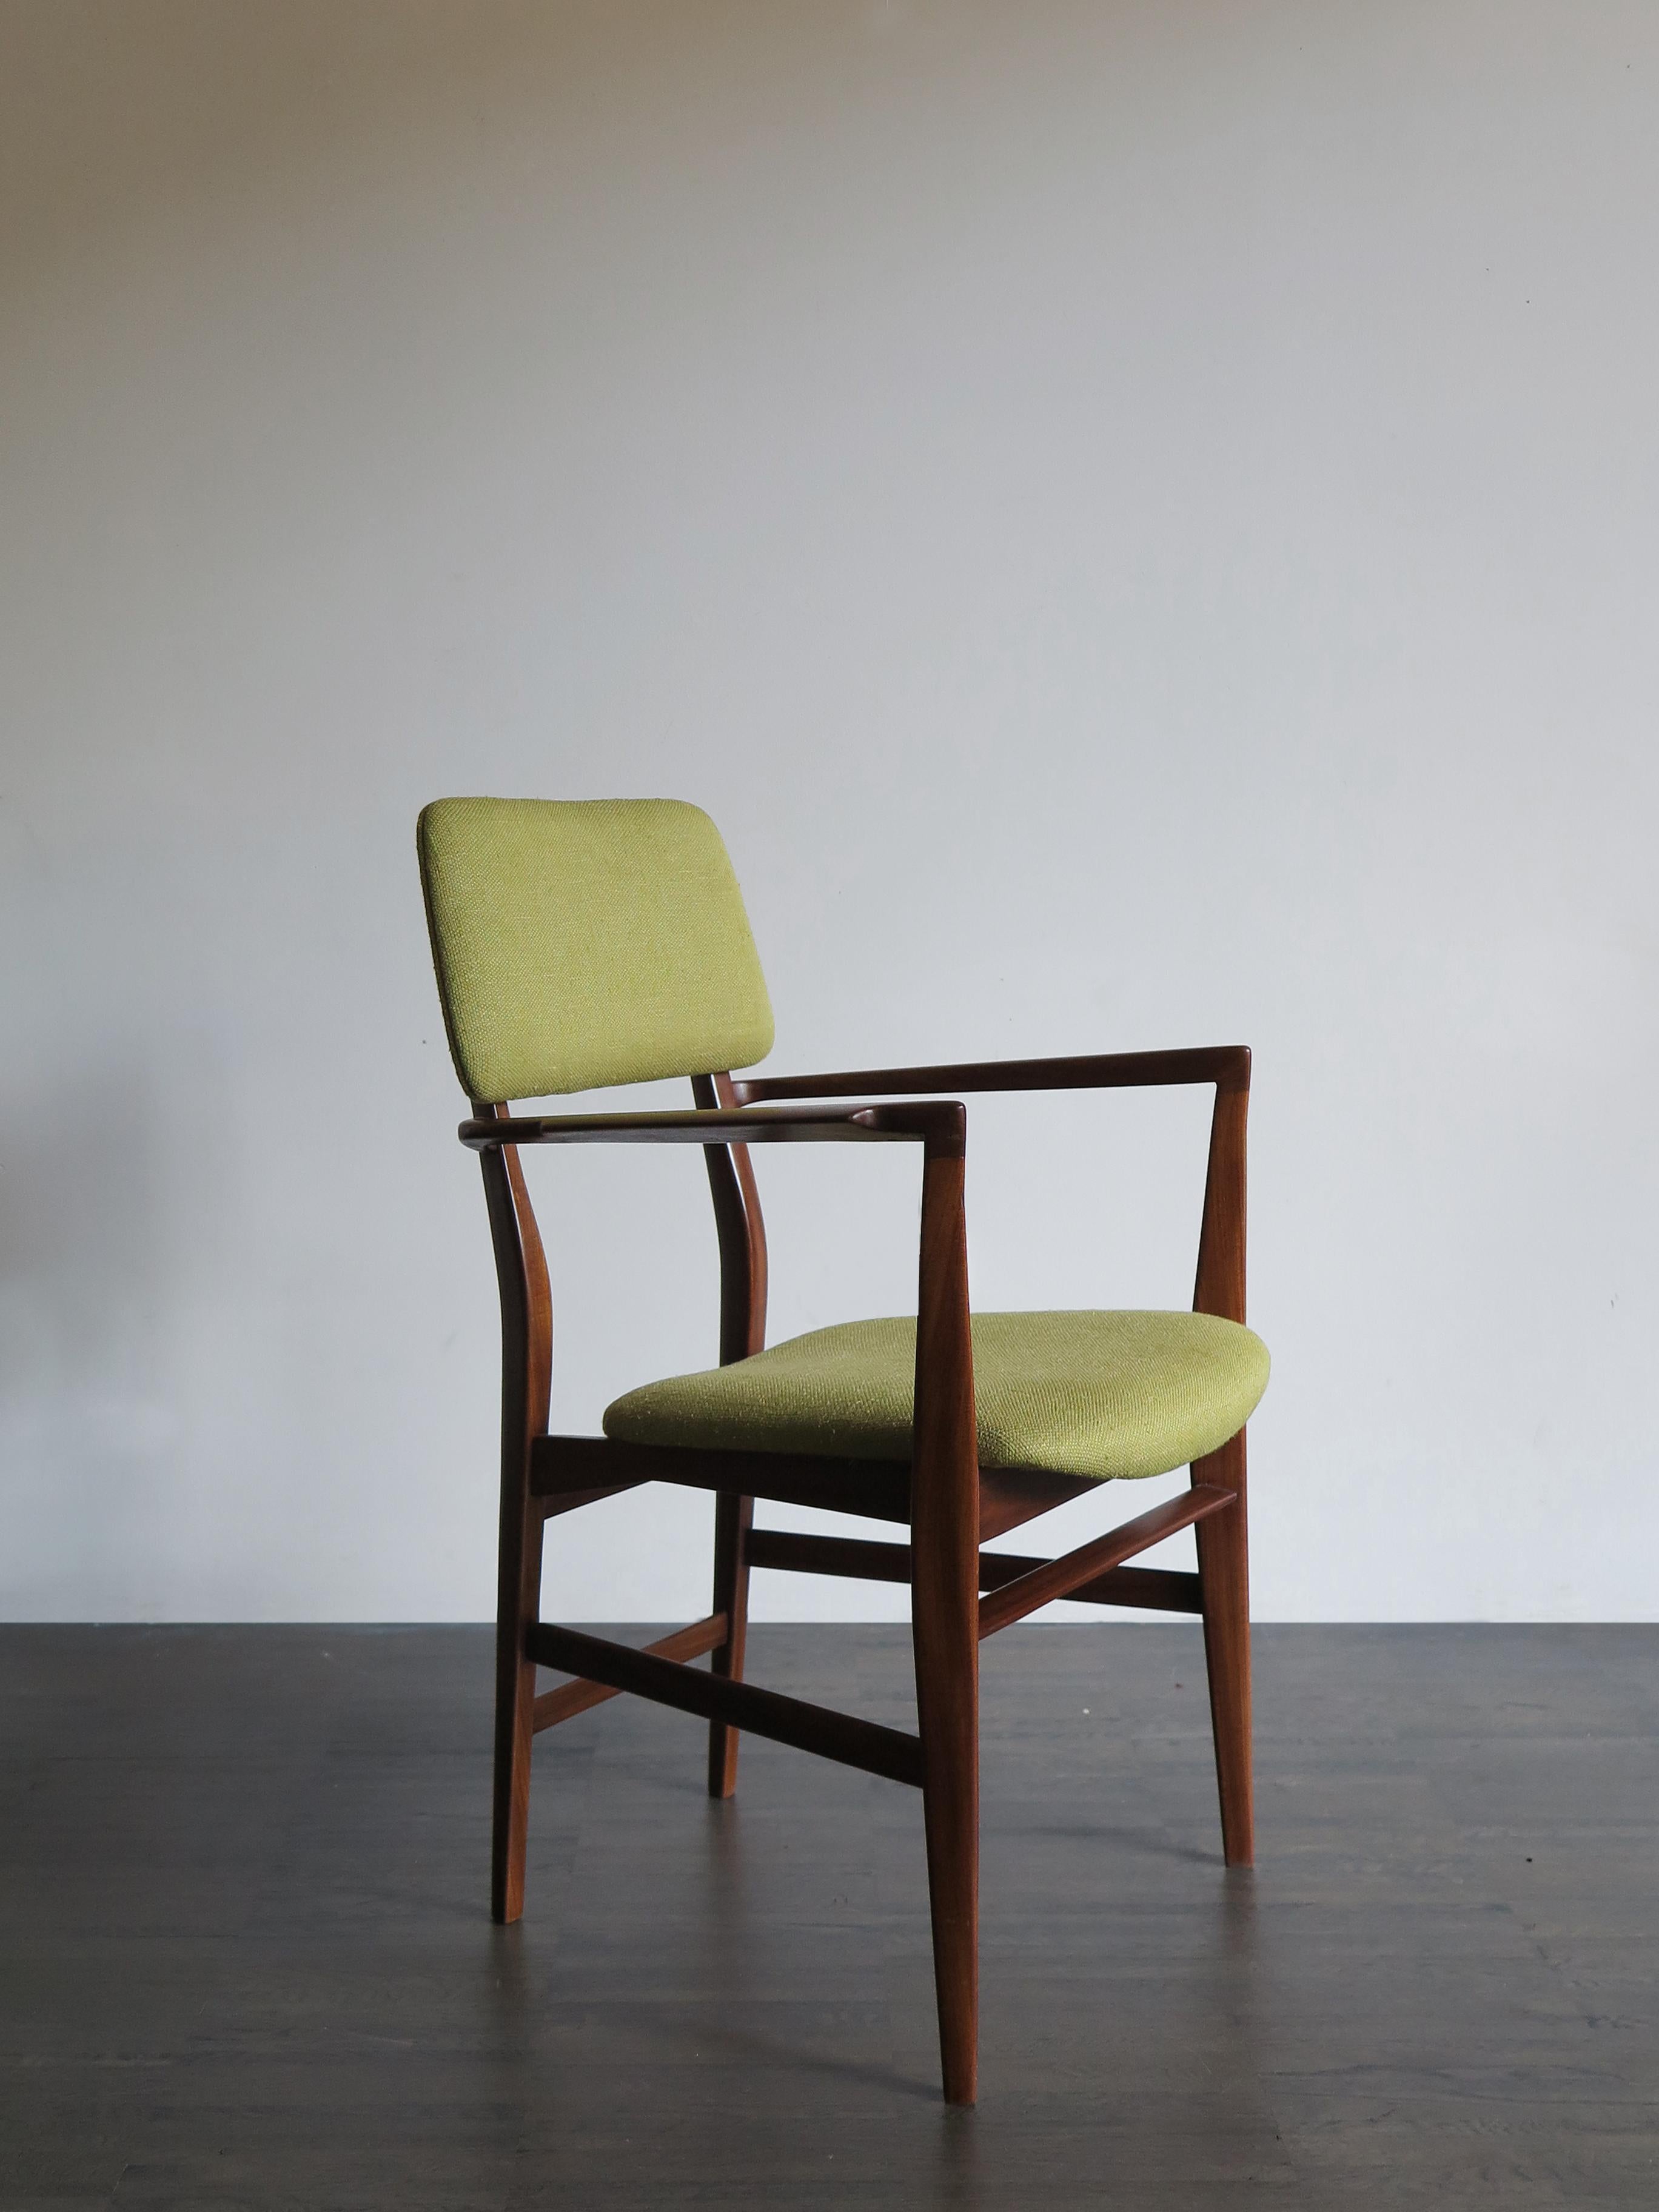 Italian Mid-Century Modern design sophisticated dining chair / armchair with armrests designed by Italian designer Edmundo Palutari and produced by Dassi, with solid wood structure and new fabric upholstery, 1950s production.

Please note that the